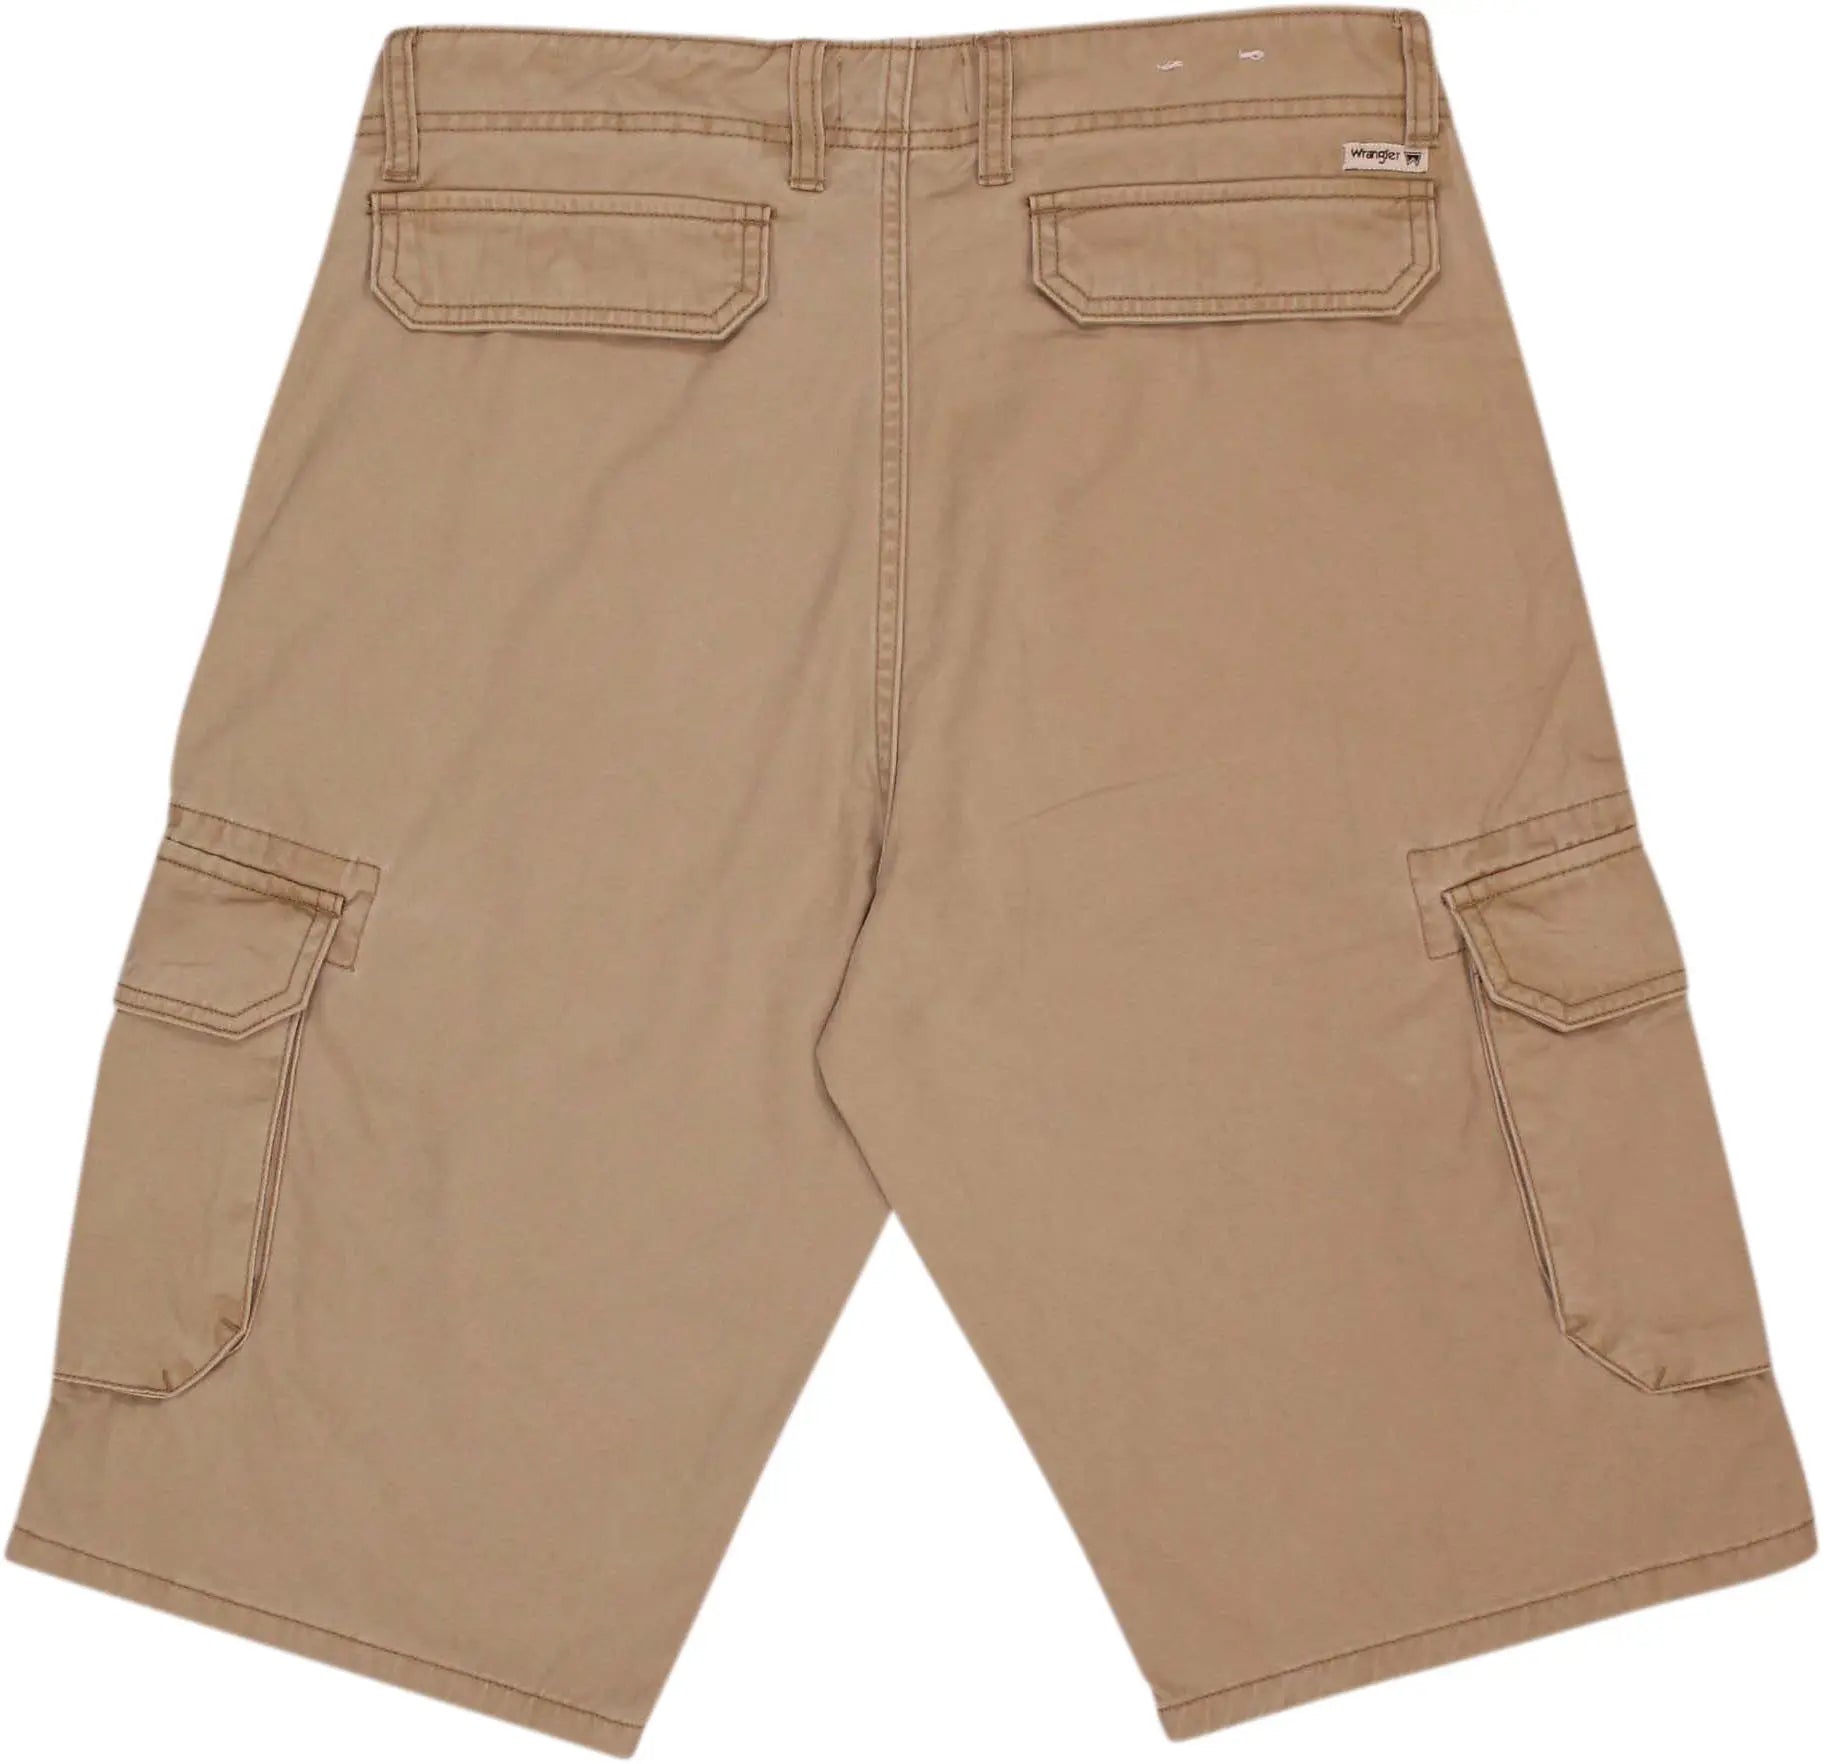 Wrangler - Cargo Shorts by Wrangler- ThriftTale.com - Vintage and second handclothing